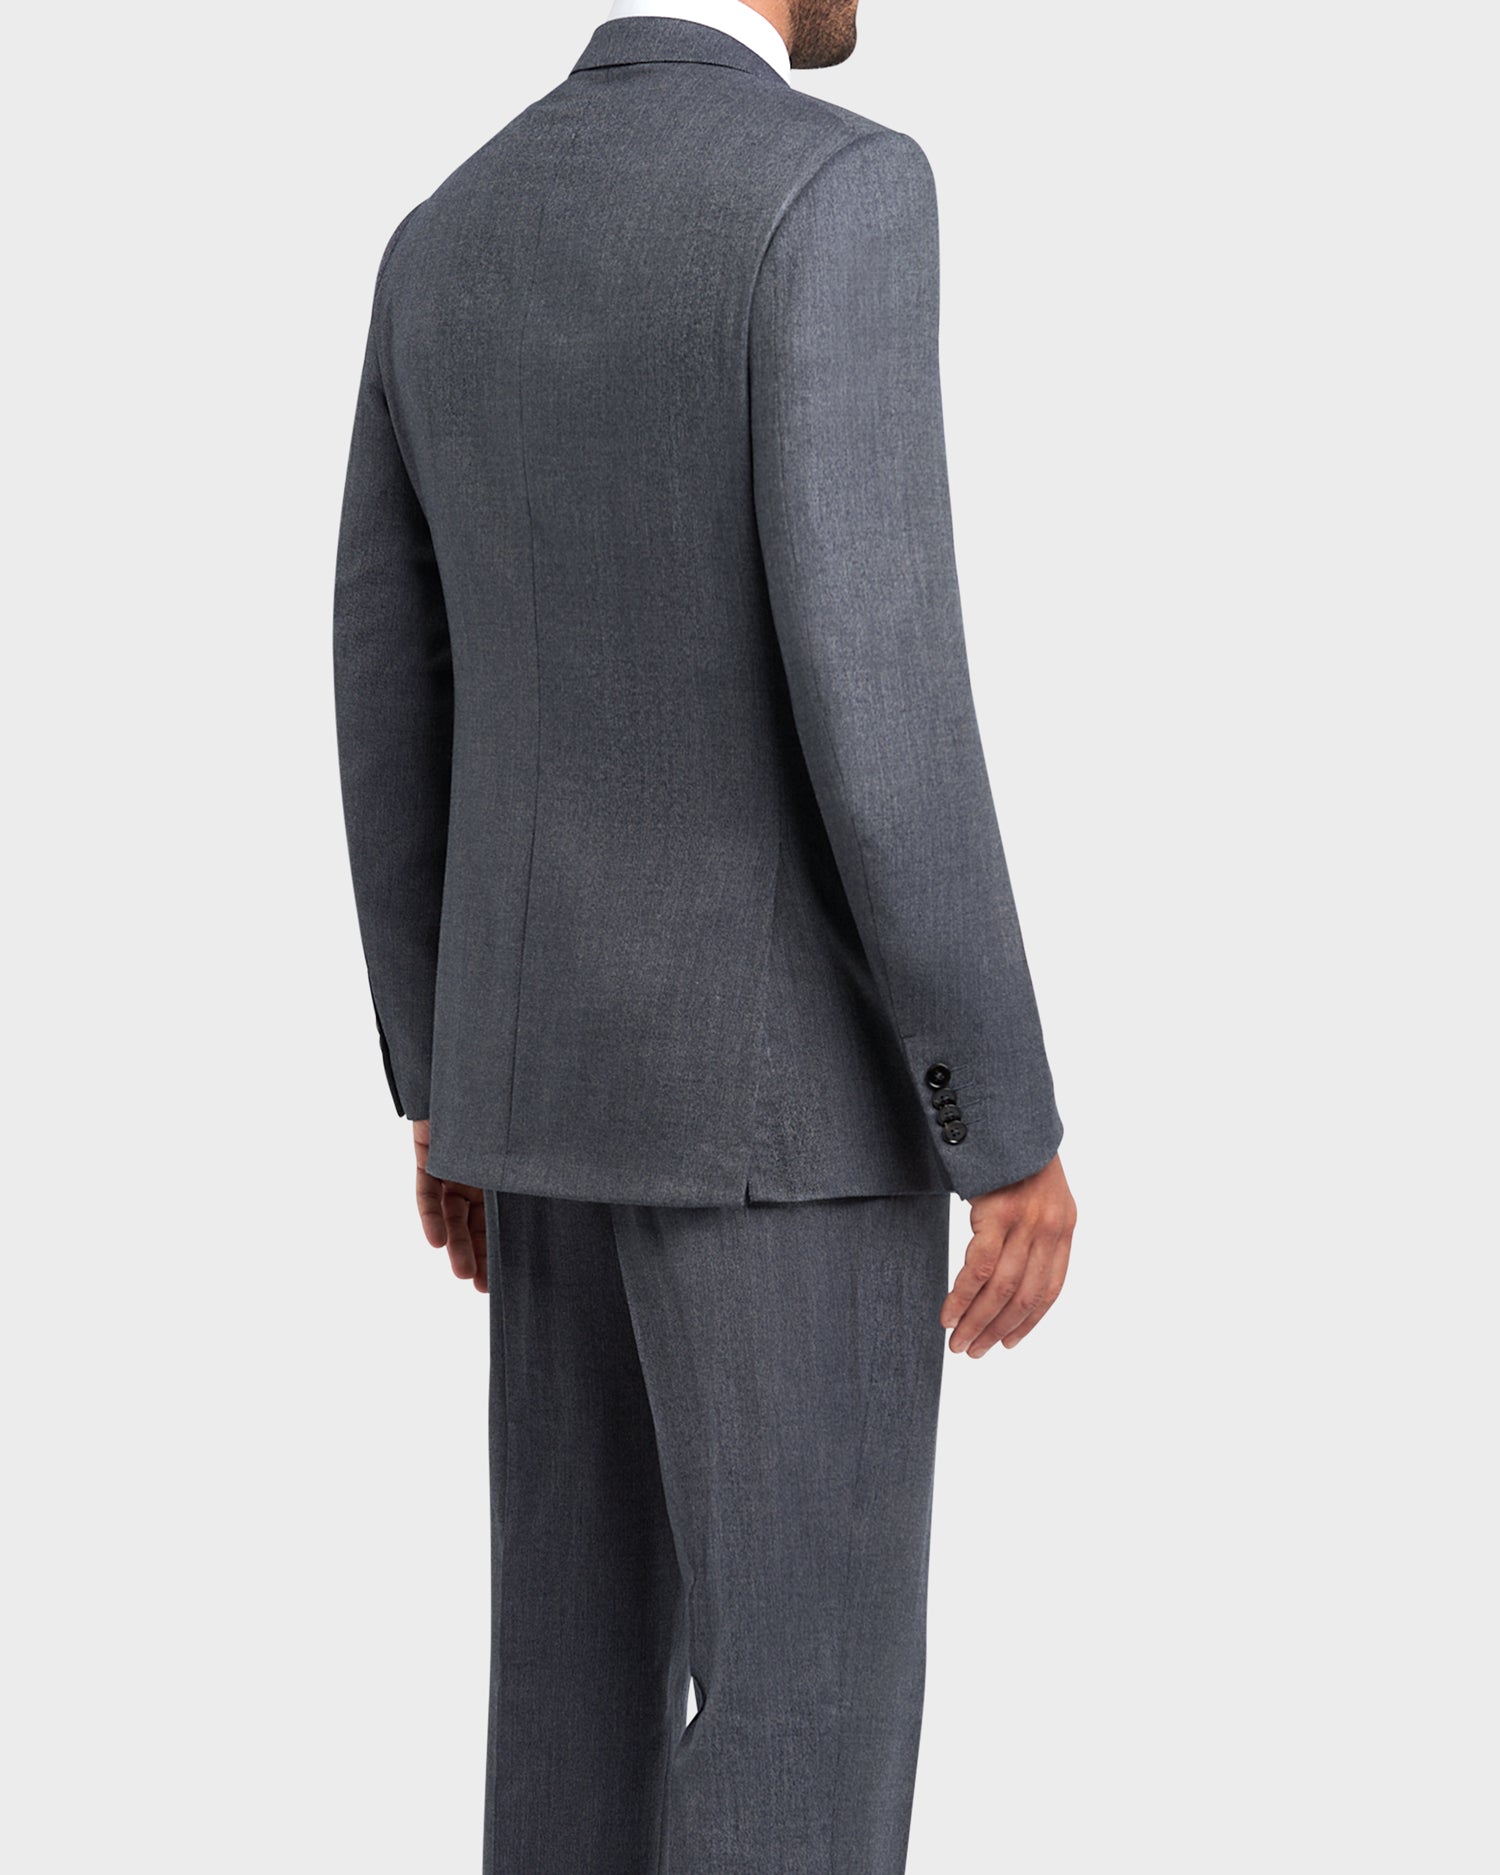 Blue Grey Microstructure15milmil15 Wool Suit